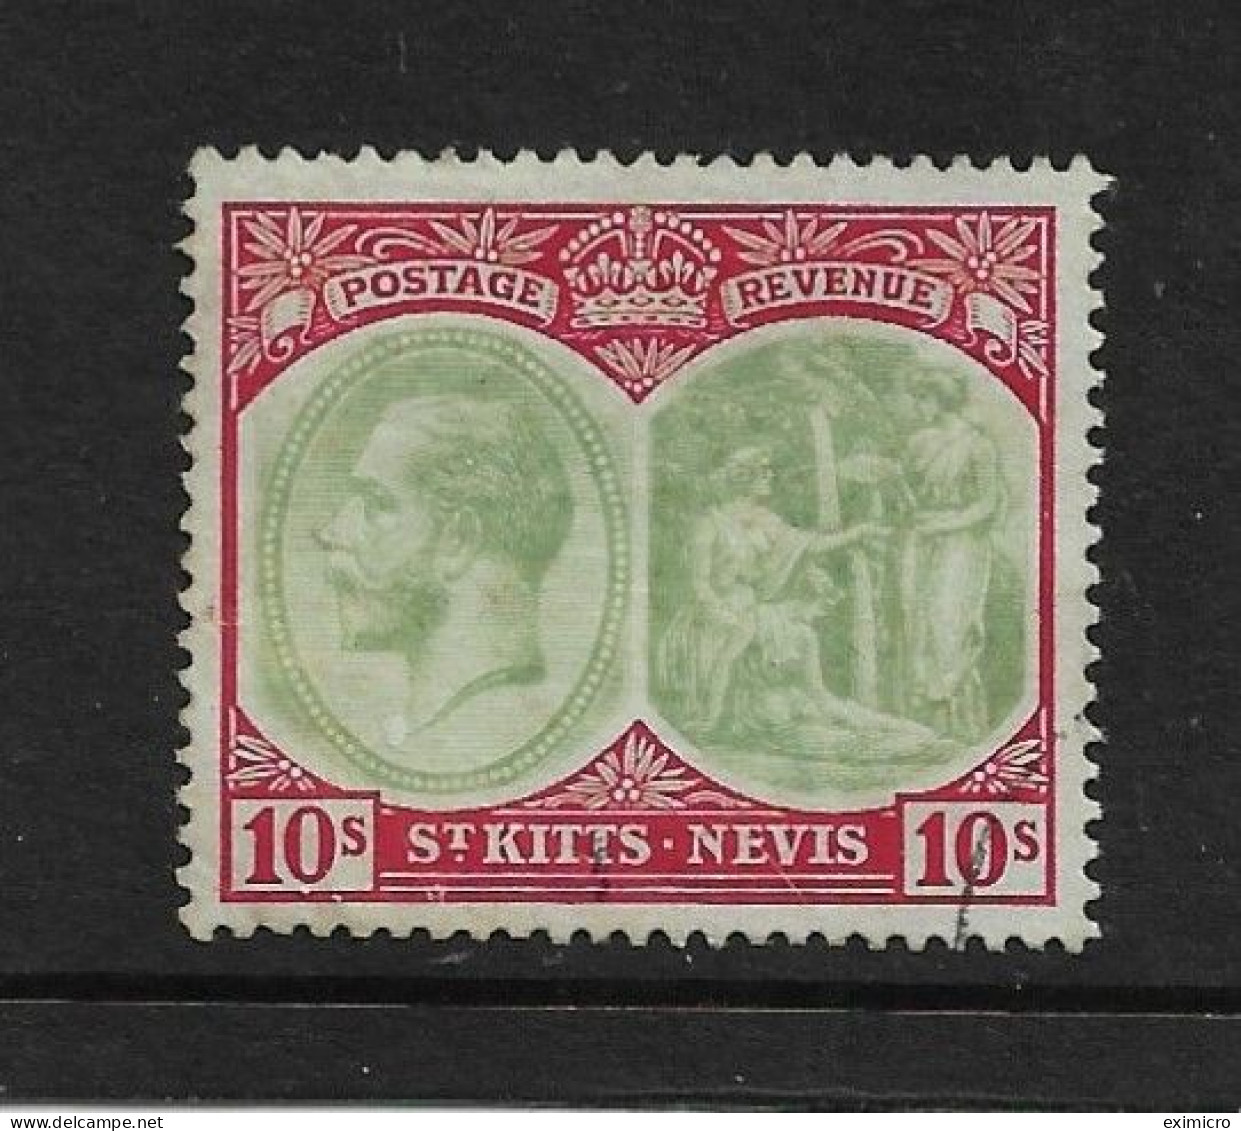 ST. KITTS - NEVIS 1920 - 1922 WATERMARK MULTIPLE CROWN CA 10s SG 35 FINE USED Cat £48 - St.Cristopher-Nevis & Anguilla (...-1980)